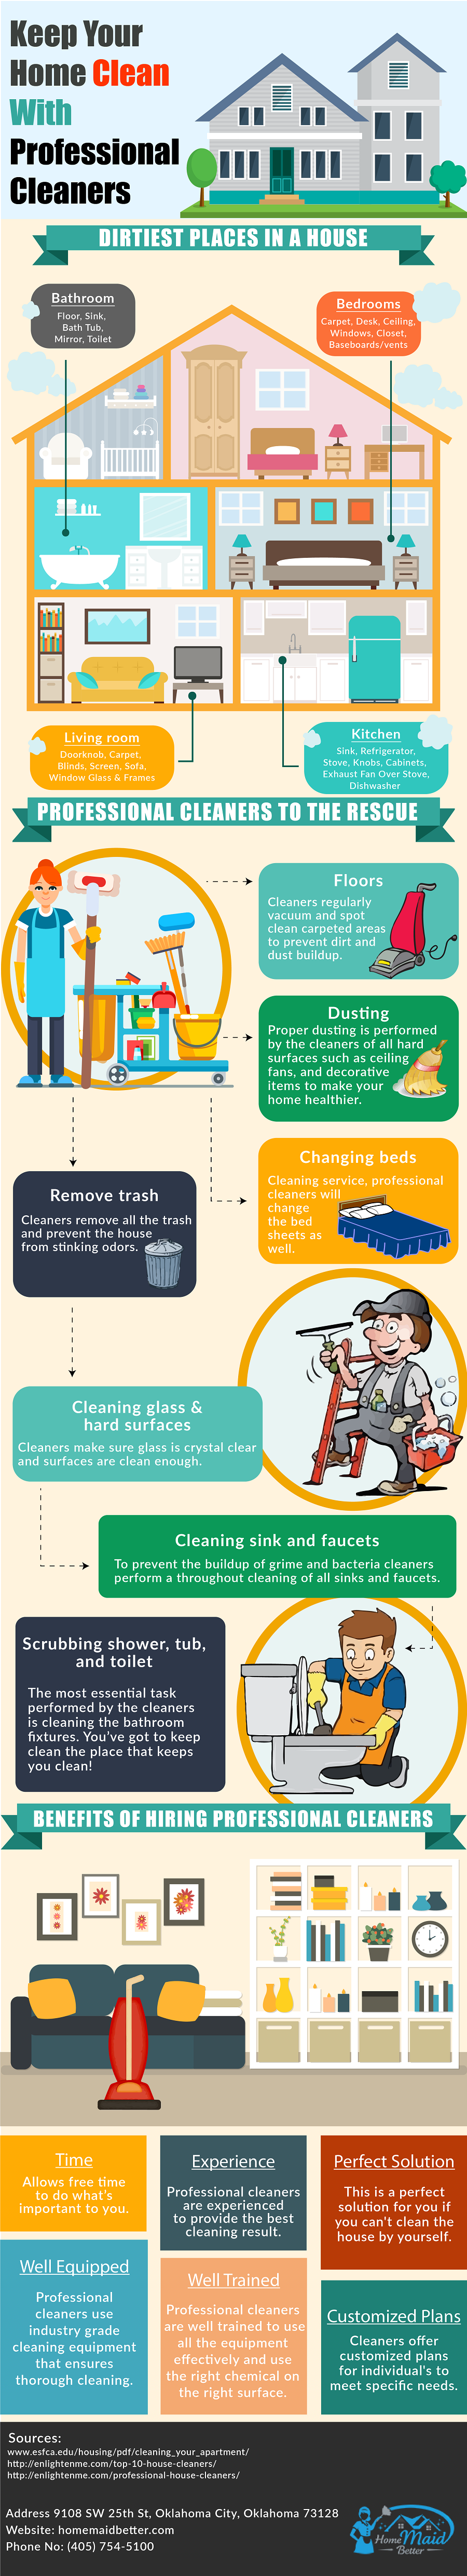 Keep Your Home Clean With Professional Cleaners